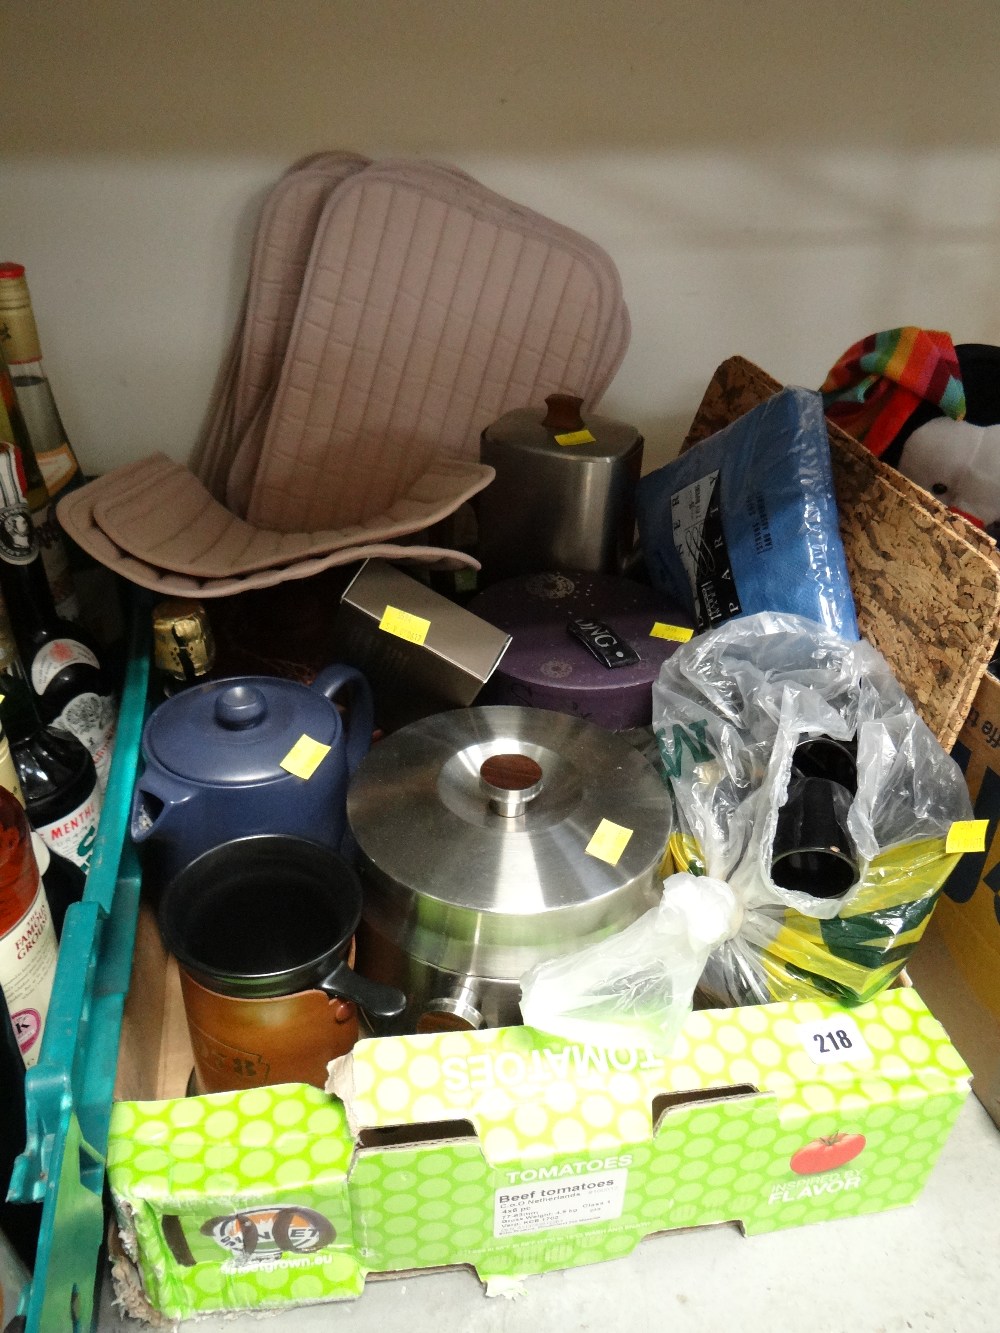 A box of household items including kitchen ware etc